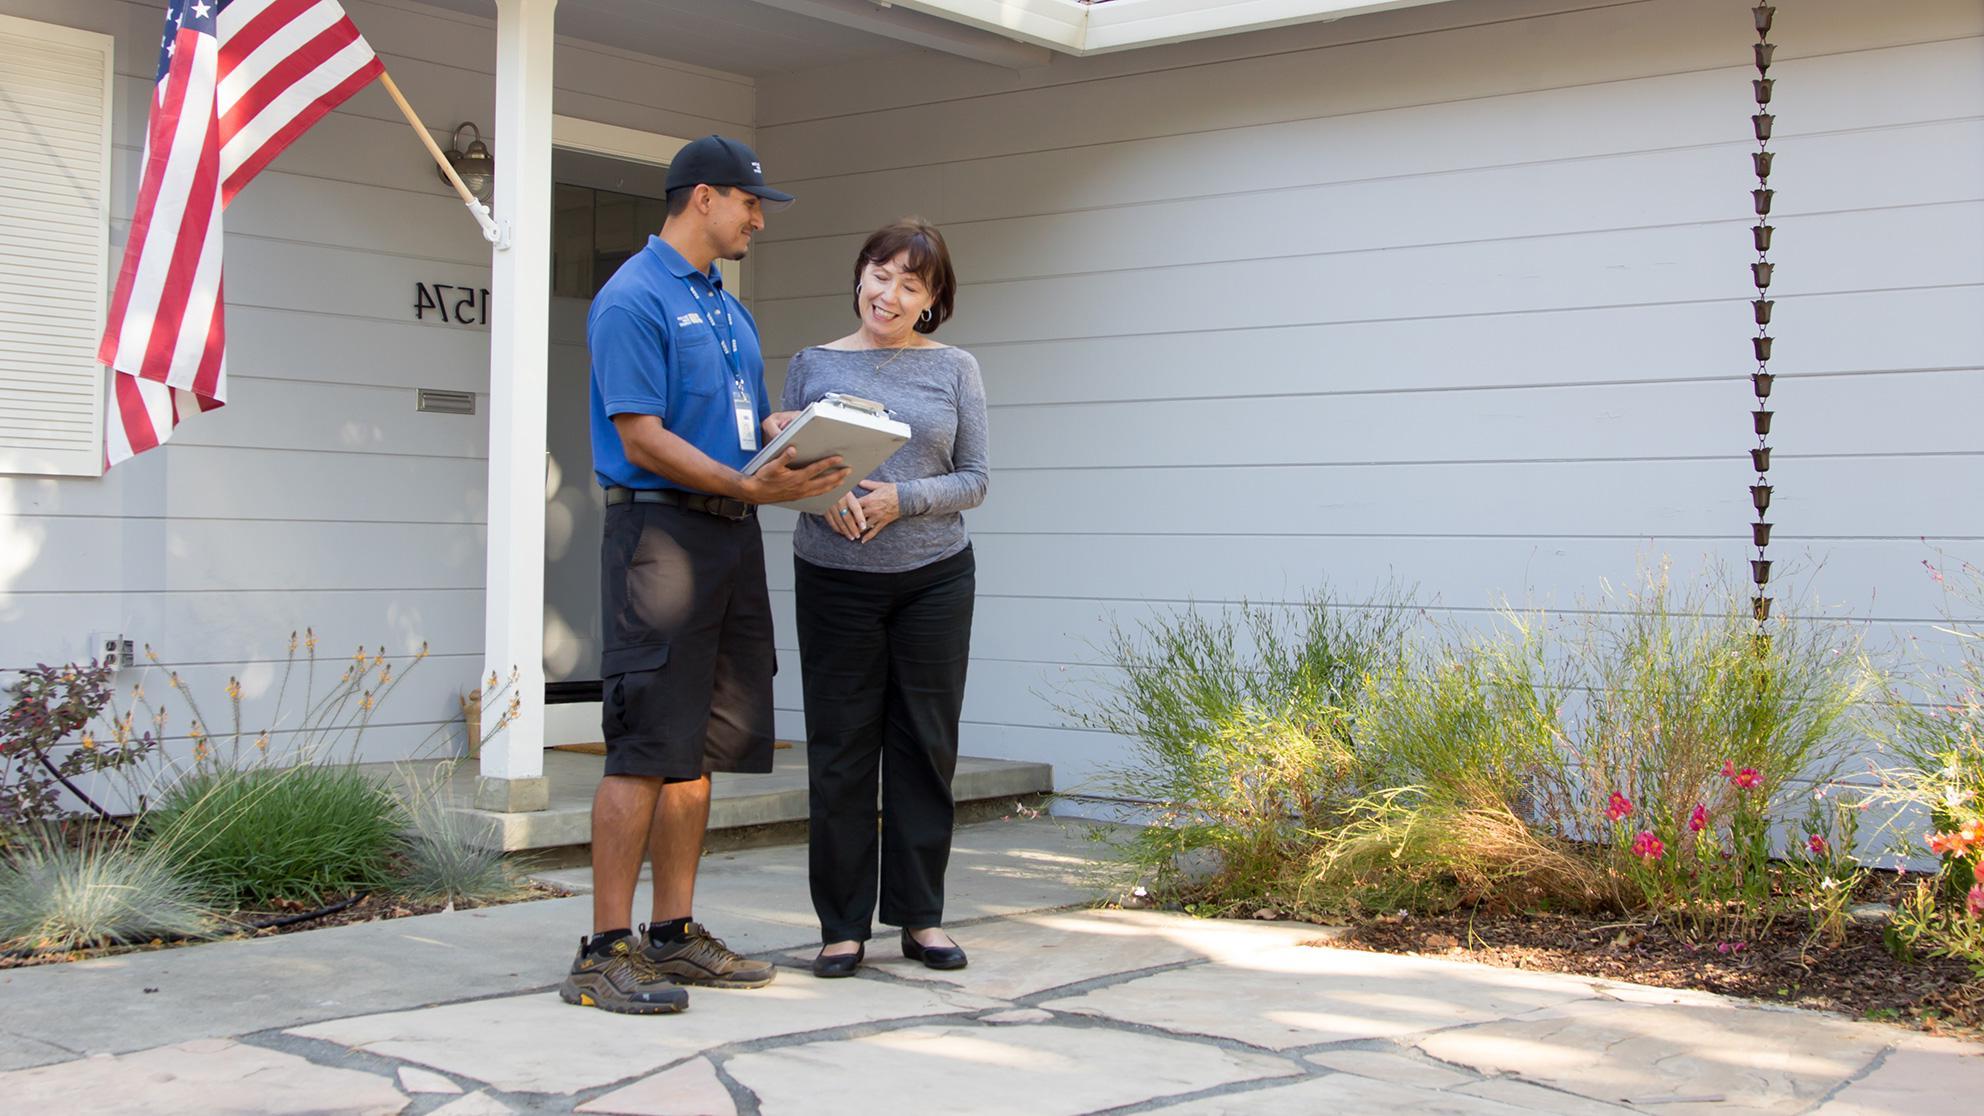 San Jose Water Worker and Customer talk outside a home